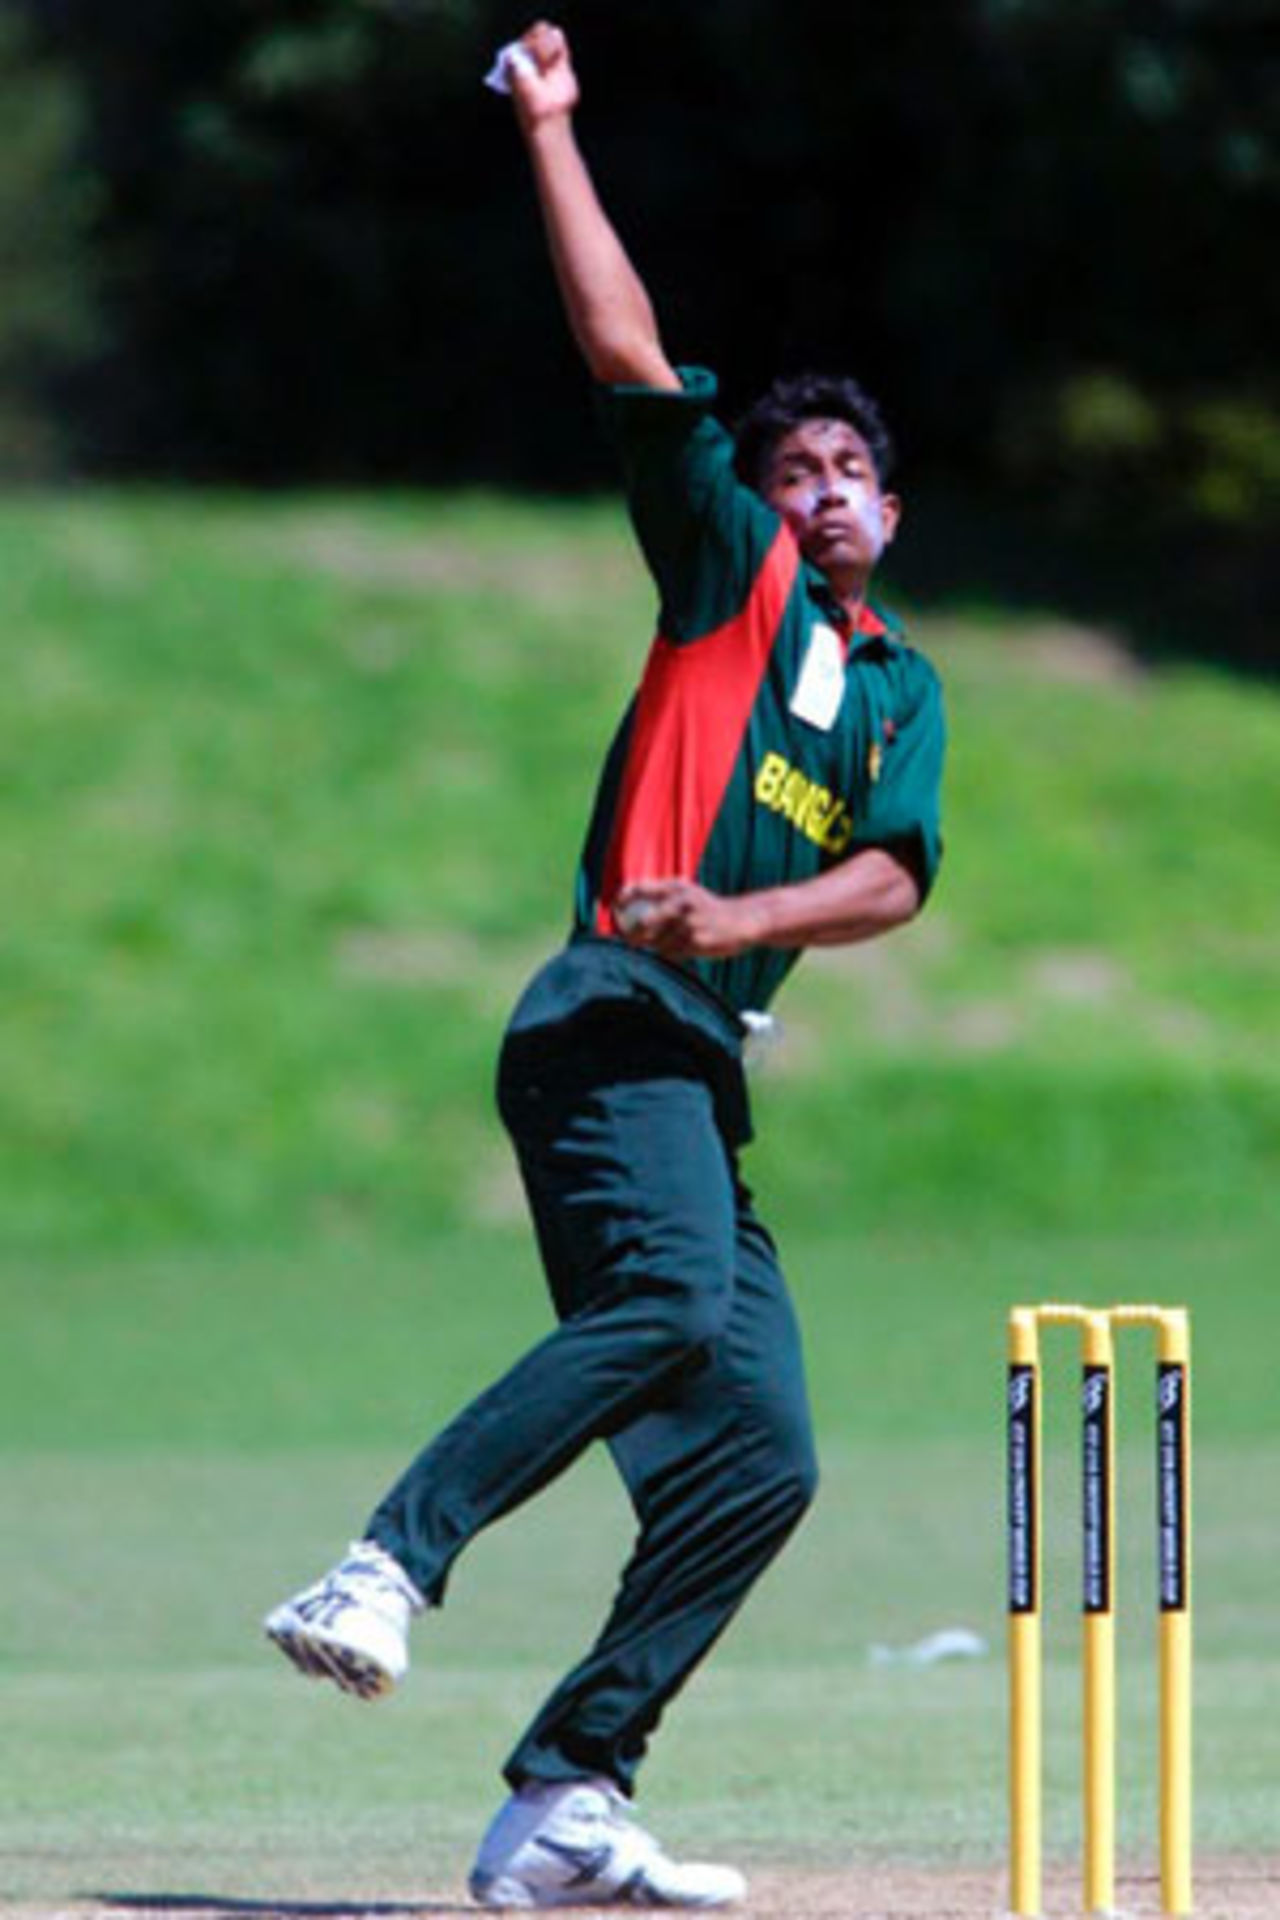 Bangladesh Under-19 bowler Shafaq Al Zabir delivers a ball during his spell of 0-6 from 1.3 overs. ICC Under-19 World Cup Group A: Bangladesh Under-19s v Canada Under-19s at Colin Maiden Park, Auckland, 22 January 2002.